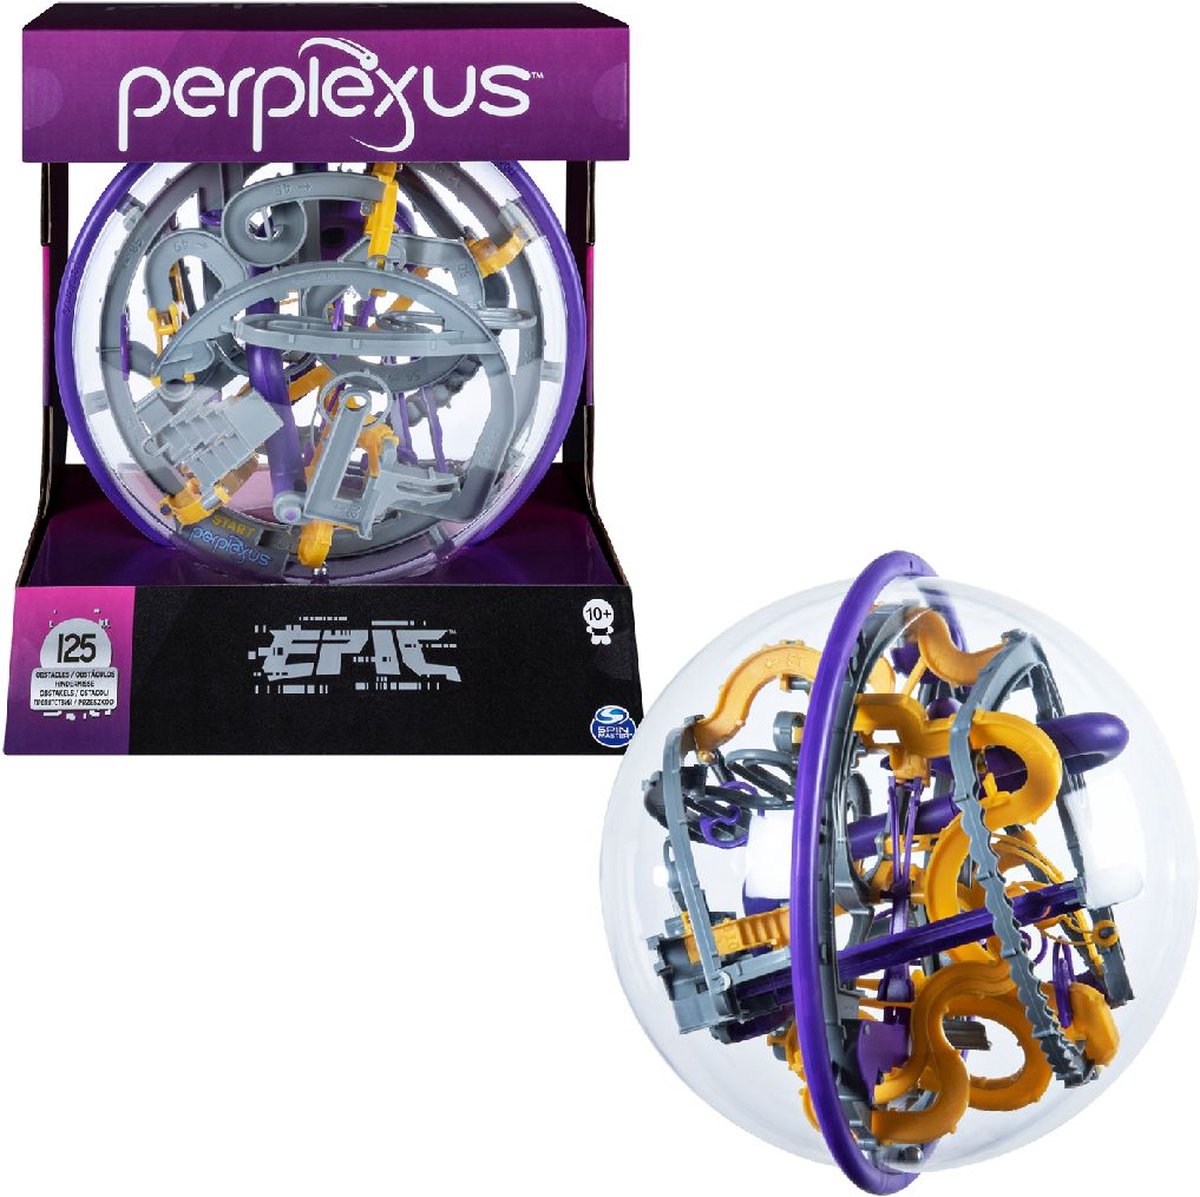 Chez Les Petits by Geahchan - Challenging Barriers •The Perplexus Rookie:  70 •The Perplexus Original: 100 •The Perplexus Epic: 125 The Perplexus 3D  Puzzle has finally landed! The Perplexus continues to evolve